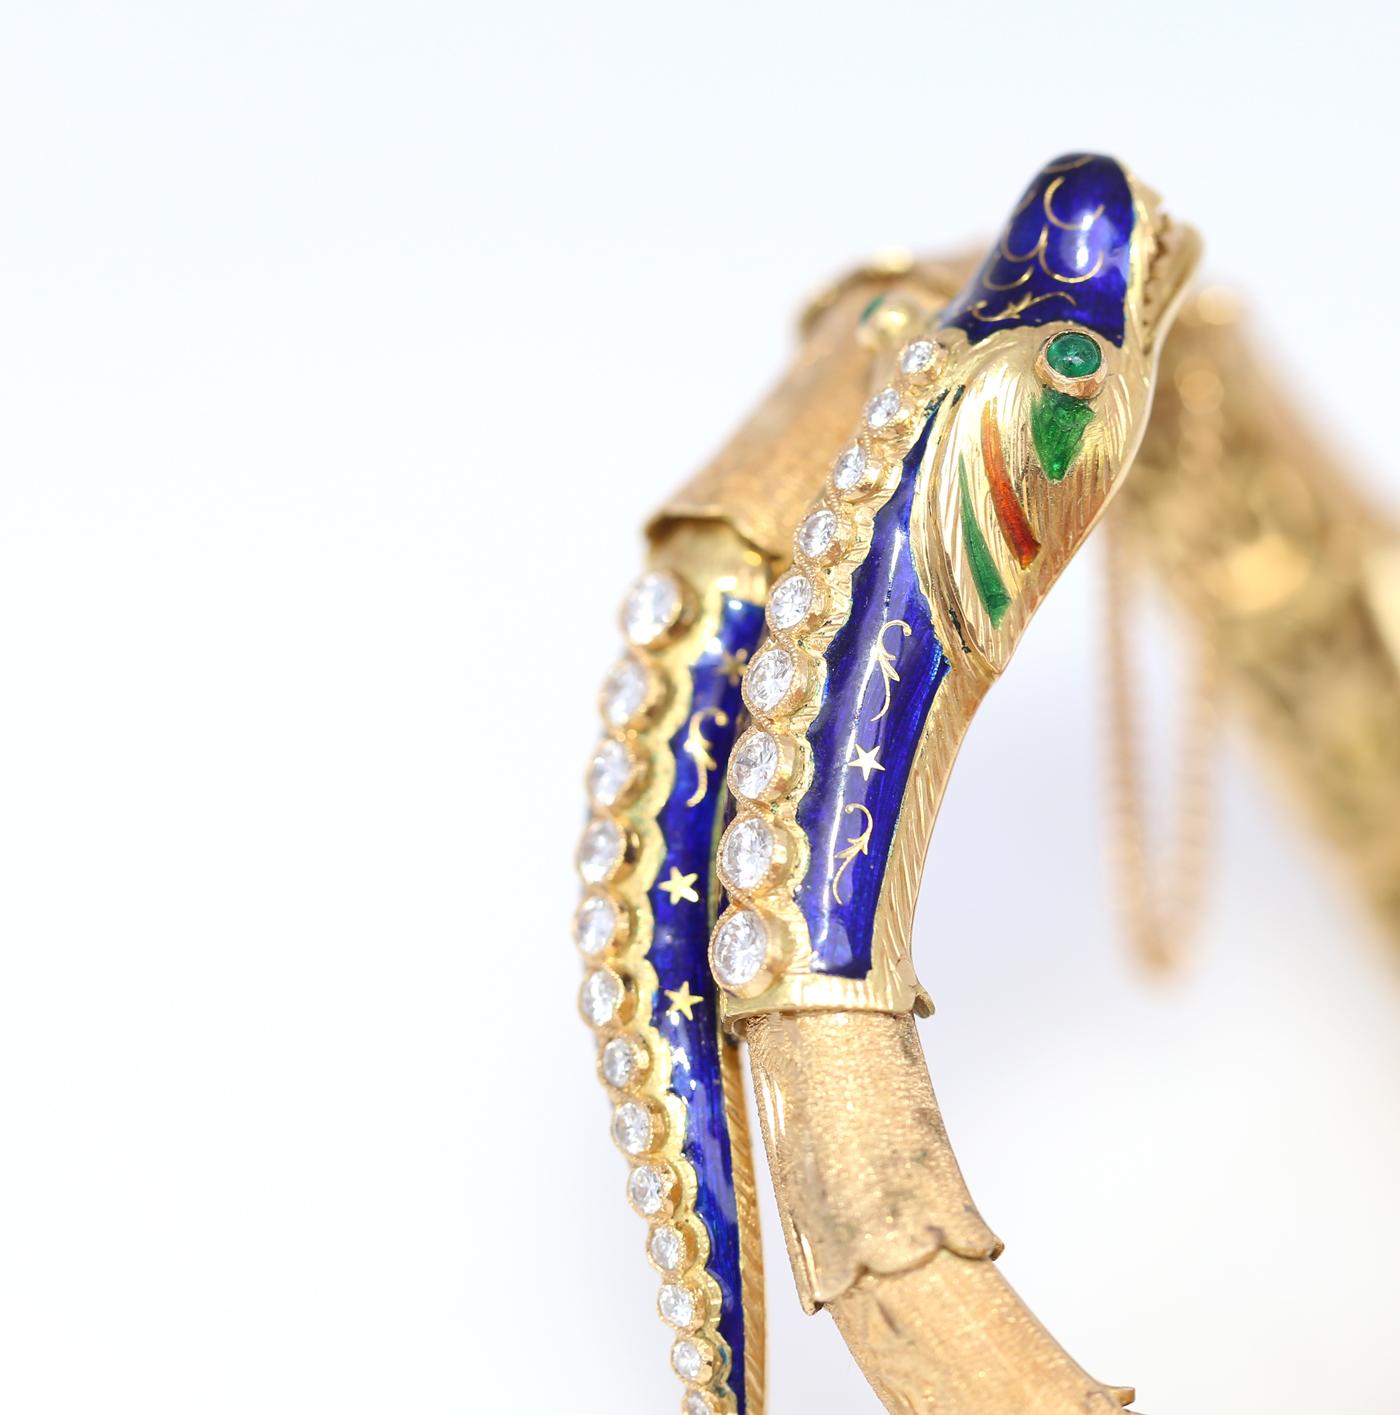 Snake or Dragon flexible Bracelet with Diamonds, Emeralds, fine blue Enamel in 18 karat Yellow Gold.
Outstanding jeweller craft, the whole skin is moving and fits perfectly on the hand. The body is carved to make it rough to touch, amazing finish. 